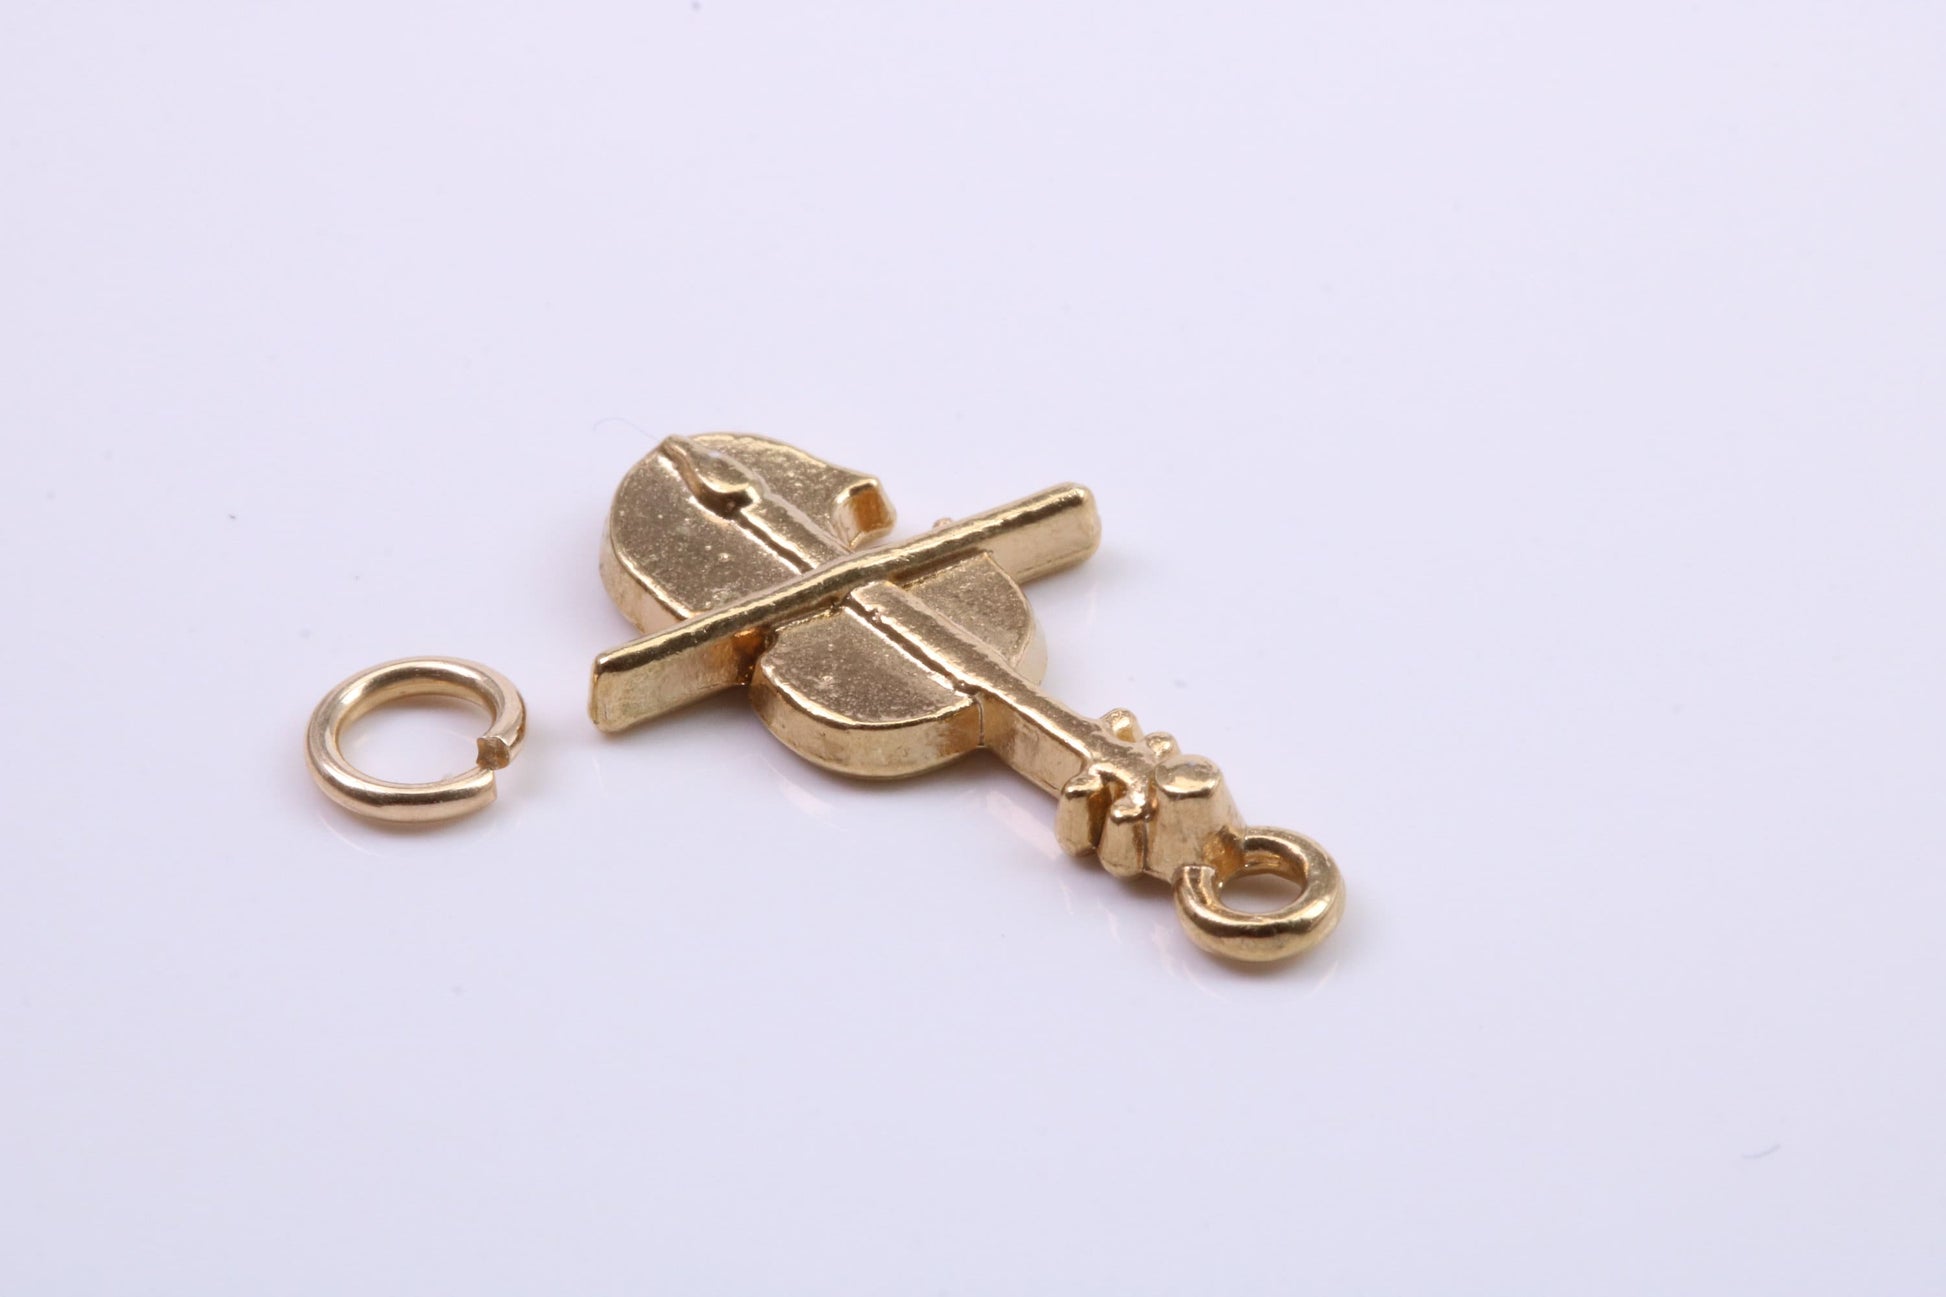 Violin Charm, Traditional Charm, Made from Solid 9ct Yellow Gold, British Hallmarked, Complete with Attachment Link